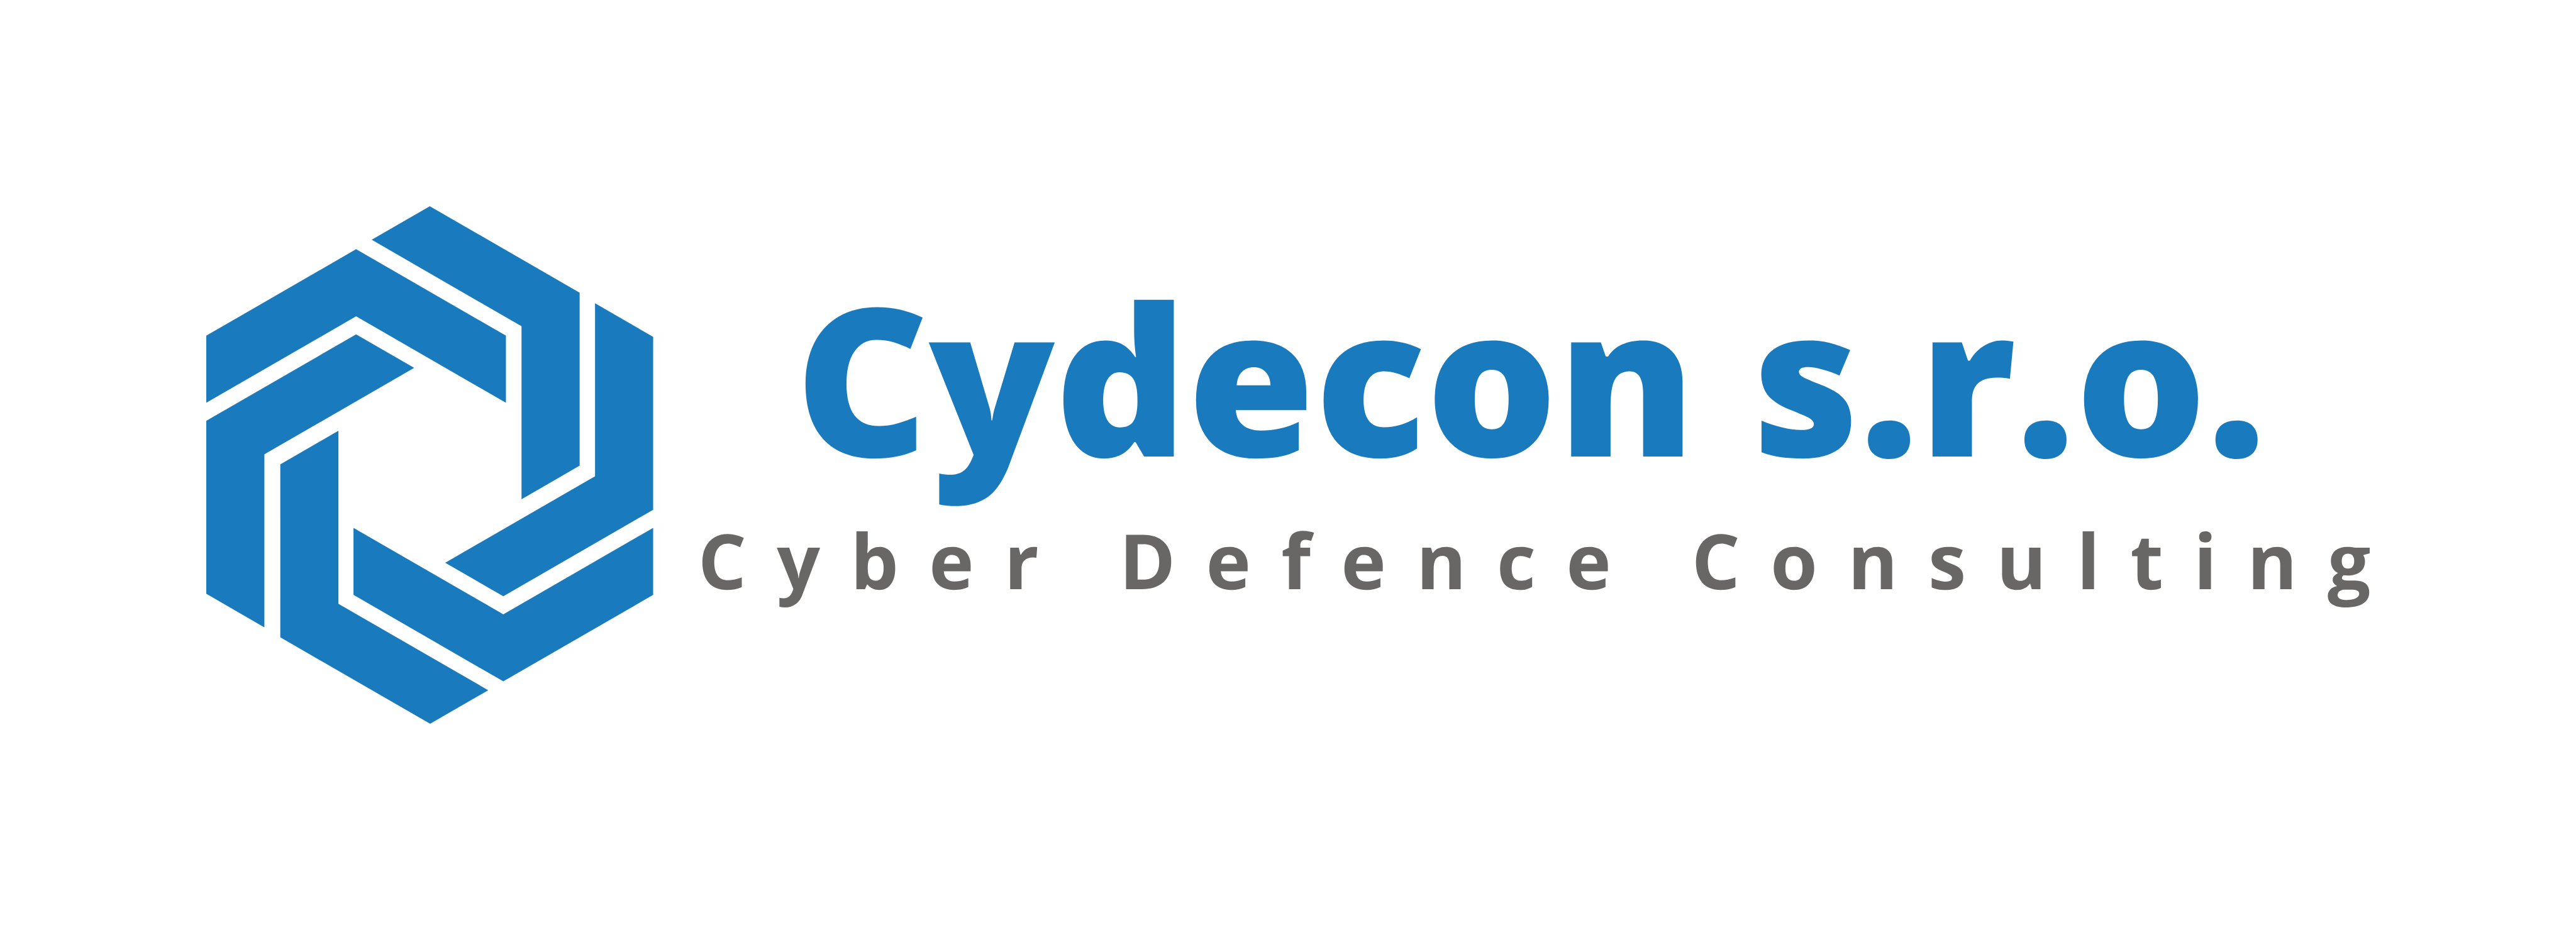 Cydecon s.r.o. Cyber Defence Consulting